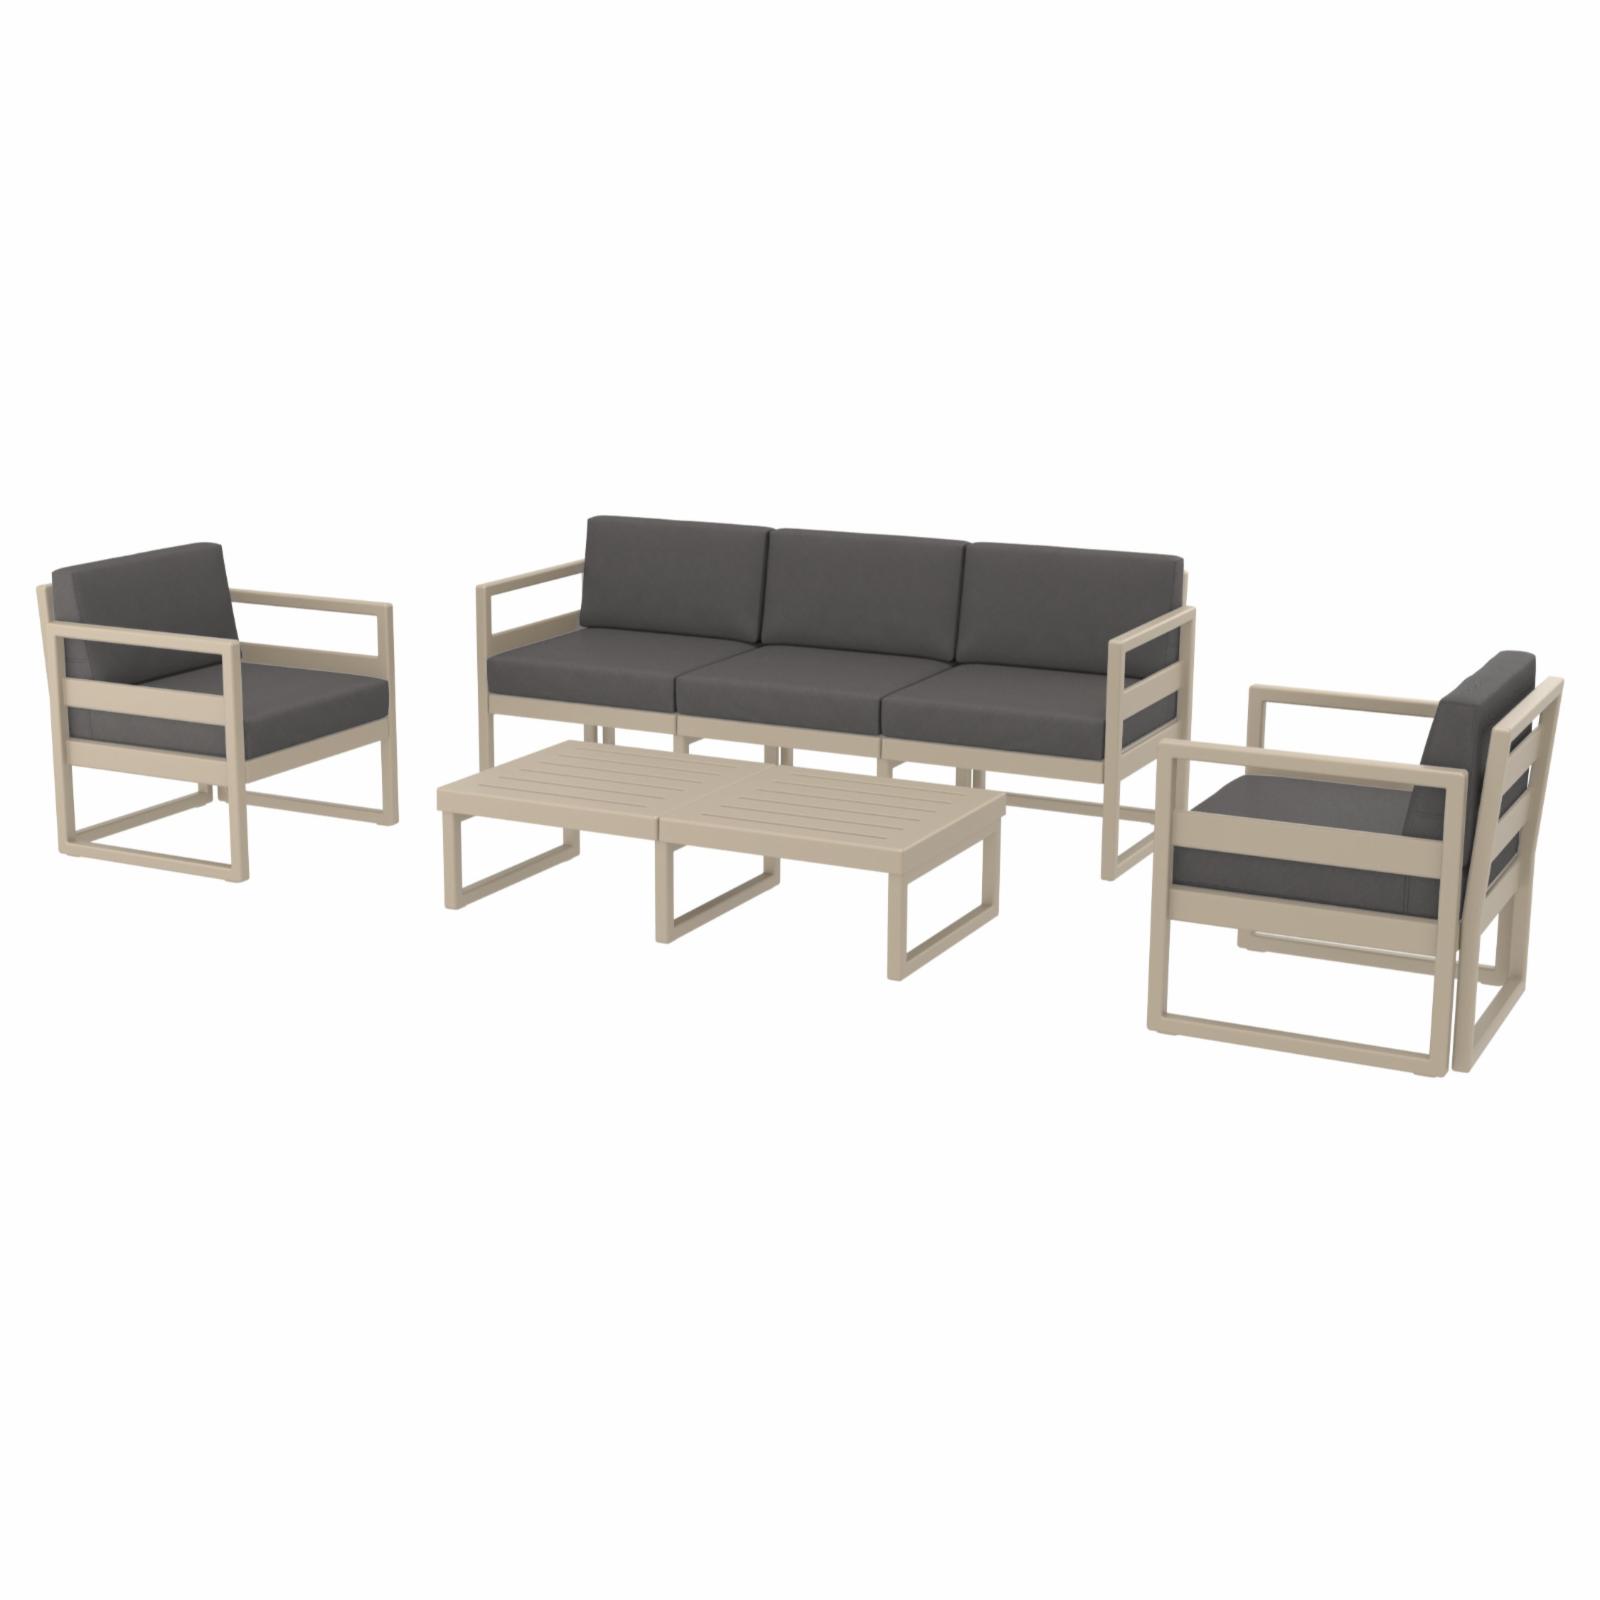 Mykonos 5 Person Lounge Set in White with Acrylic Fabric Taupe Cushions - image 1 of 3